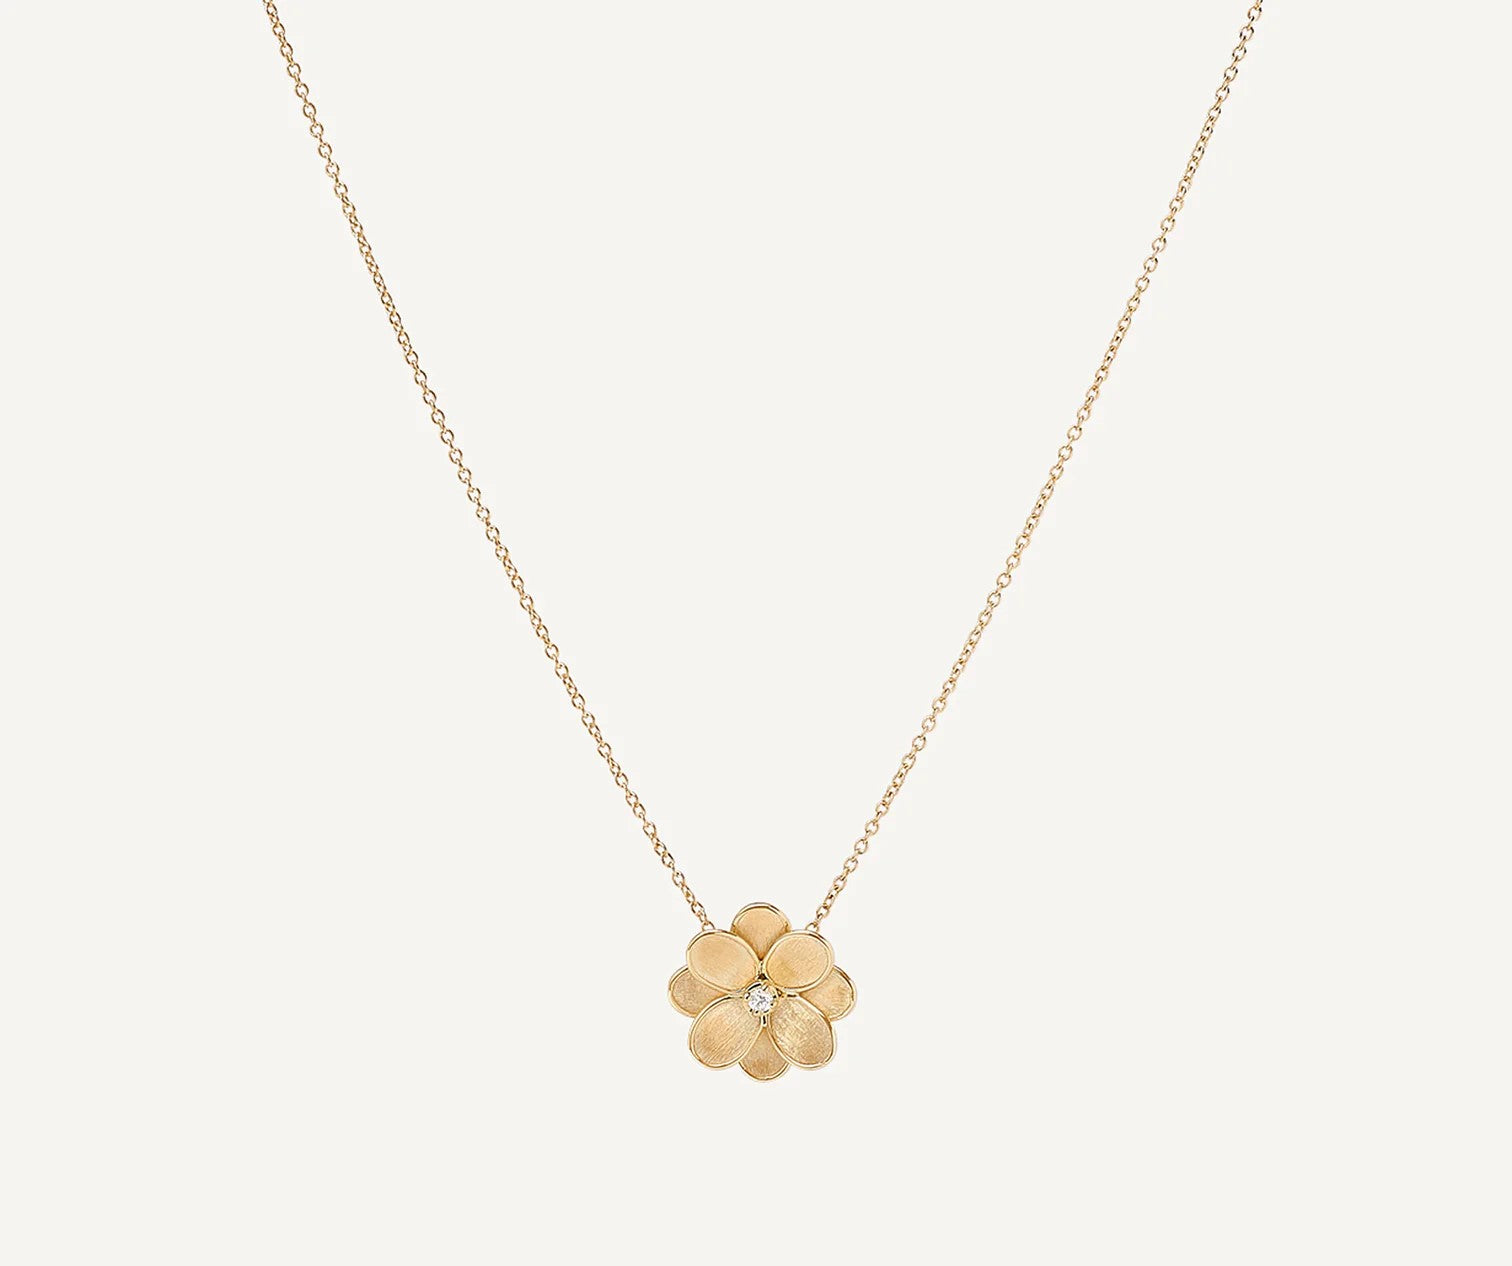 18K YELLOW GOLD AND DIAMOND FLOWER NECKLACE FROM THE PETALI COLLECTION